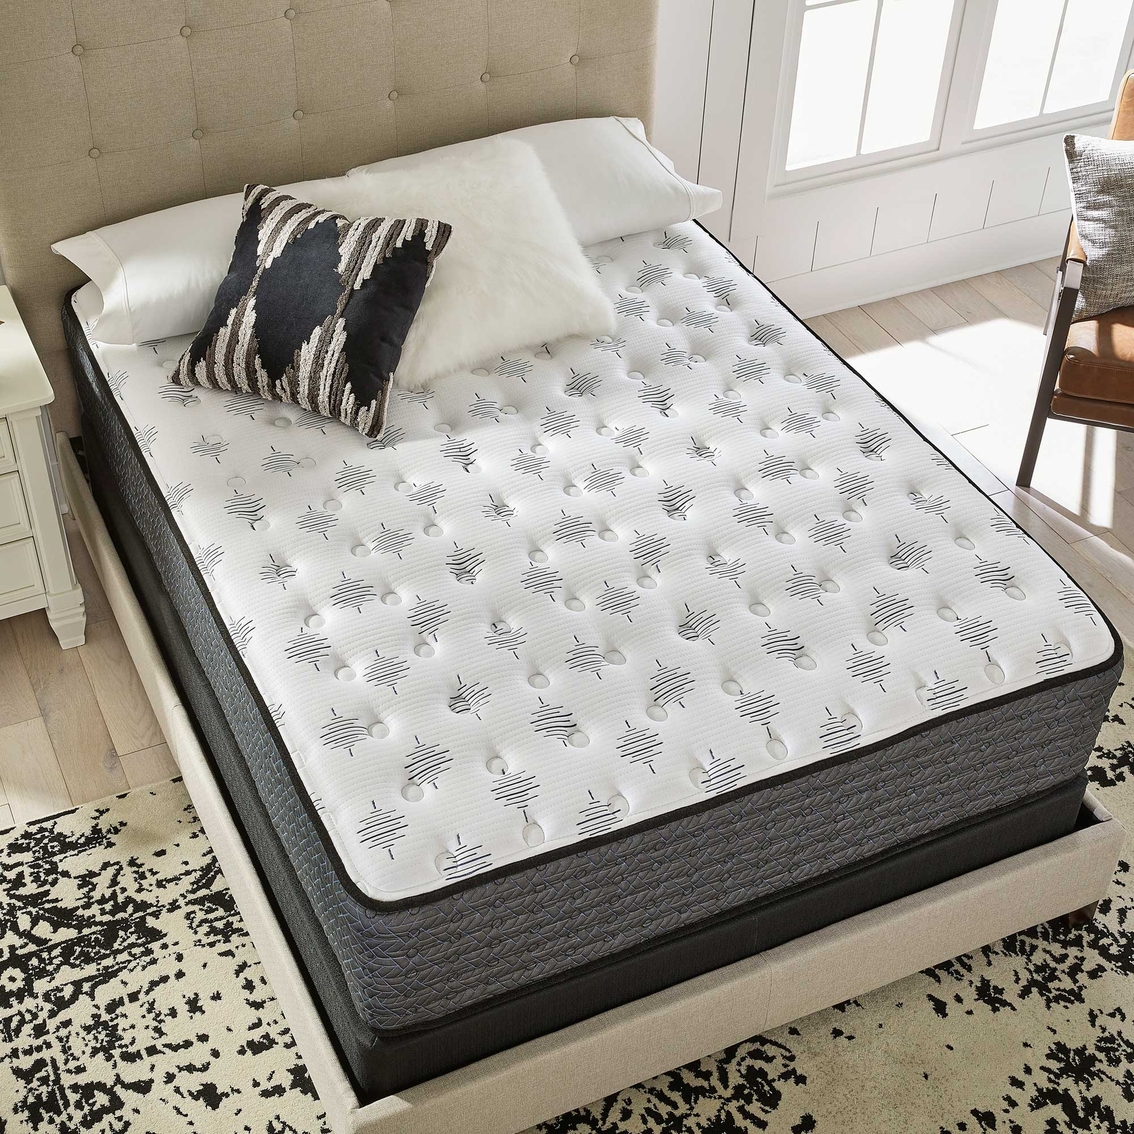 Sierra Sleep by Ashley Ultra Luxury Firm Tight Top with Memory Foam Mattress - Image 5 of 5